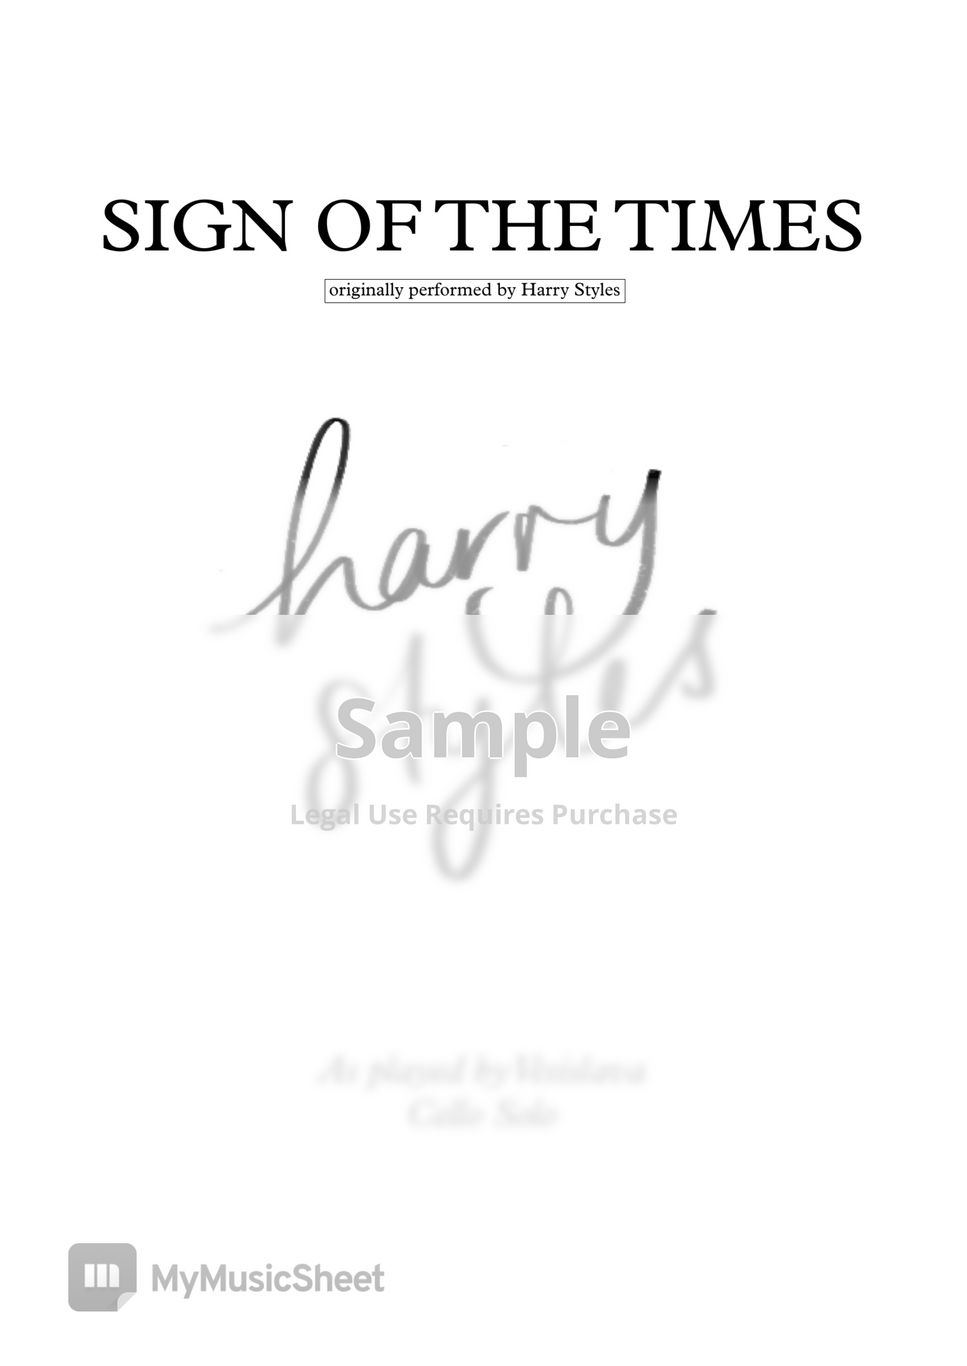 Harry Styles - Sign of the Times by Vesislava